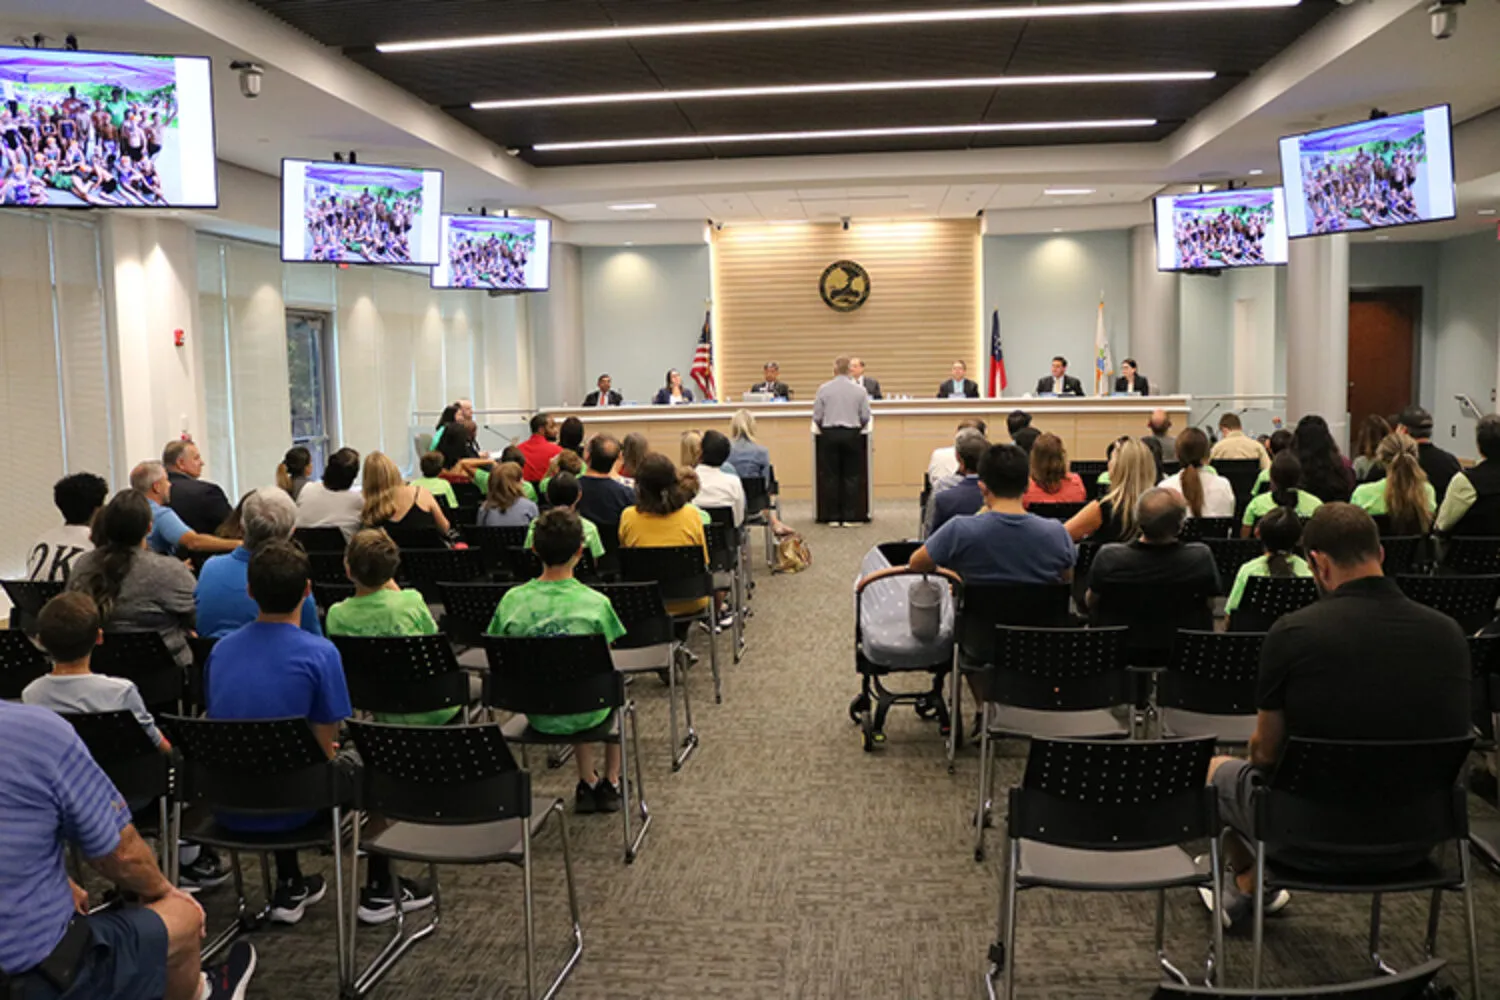 Attendees at a City Council Meeting